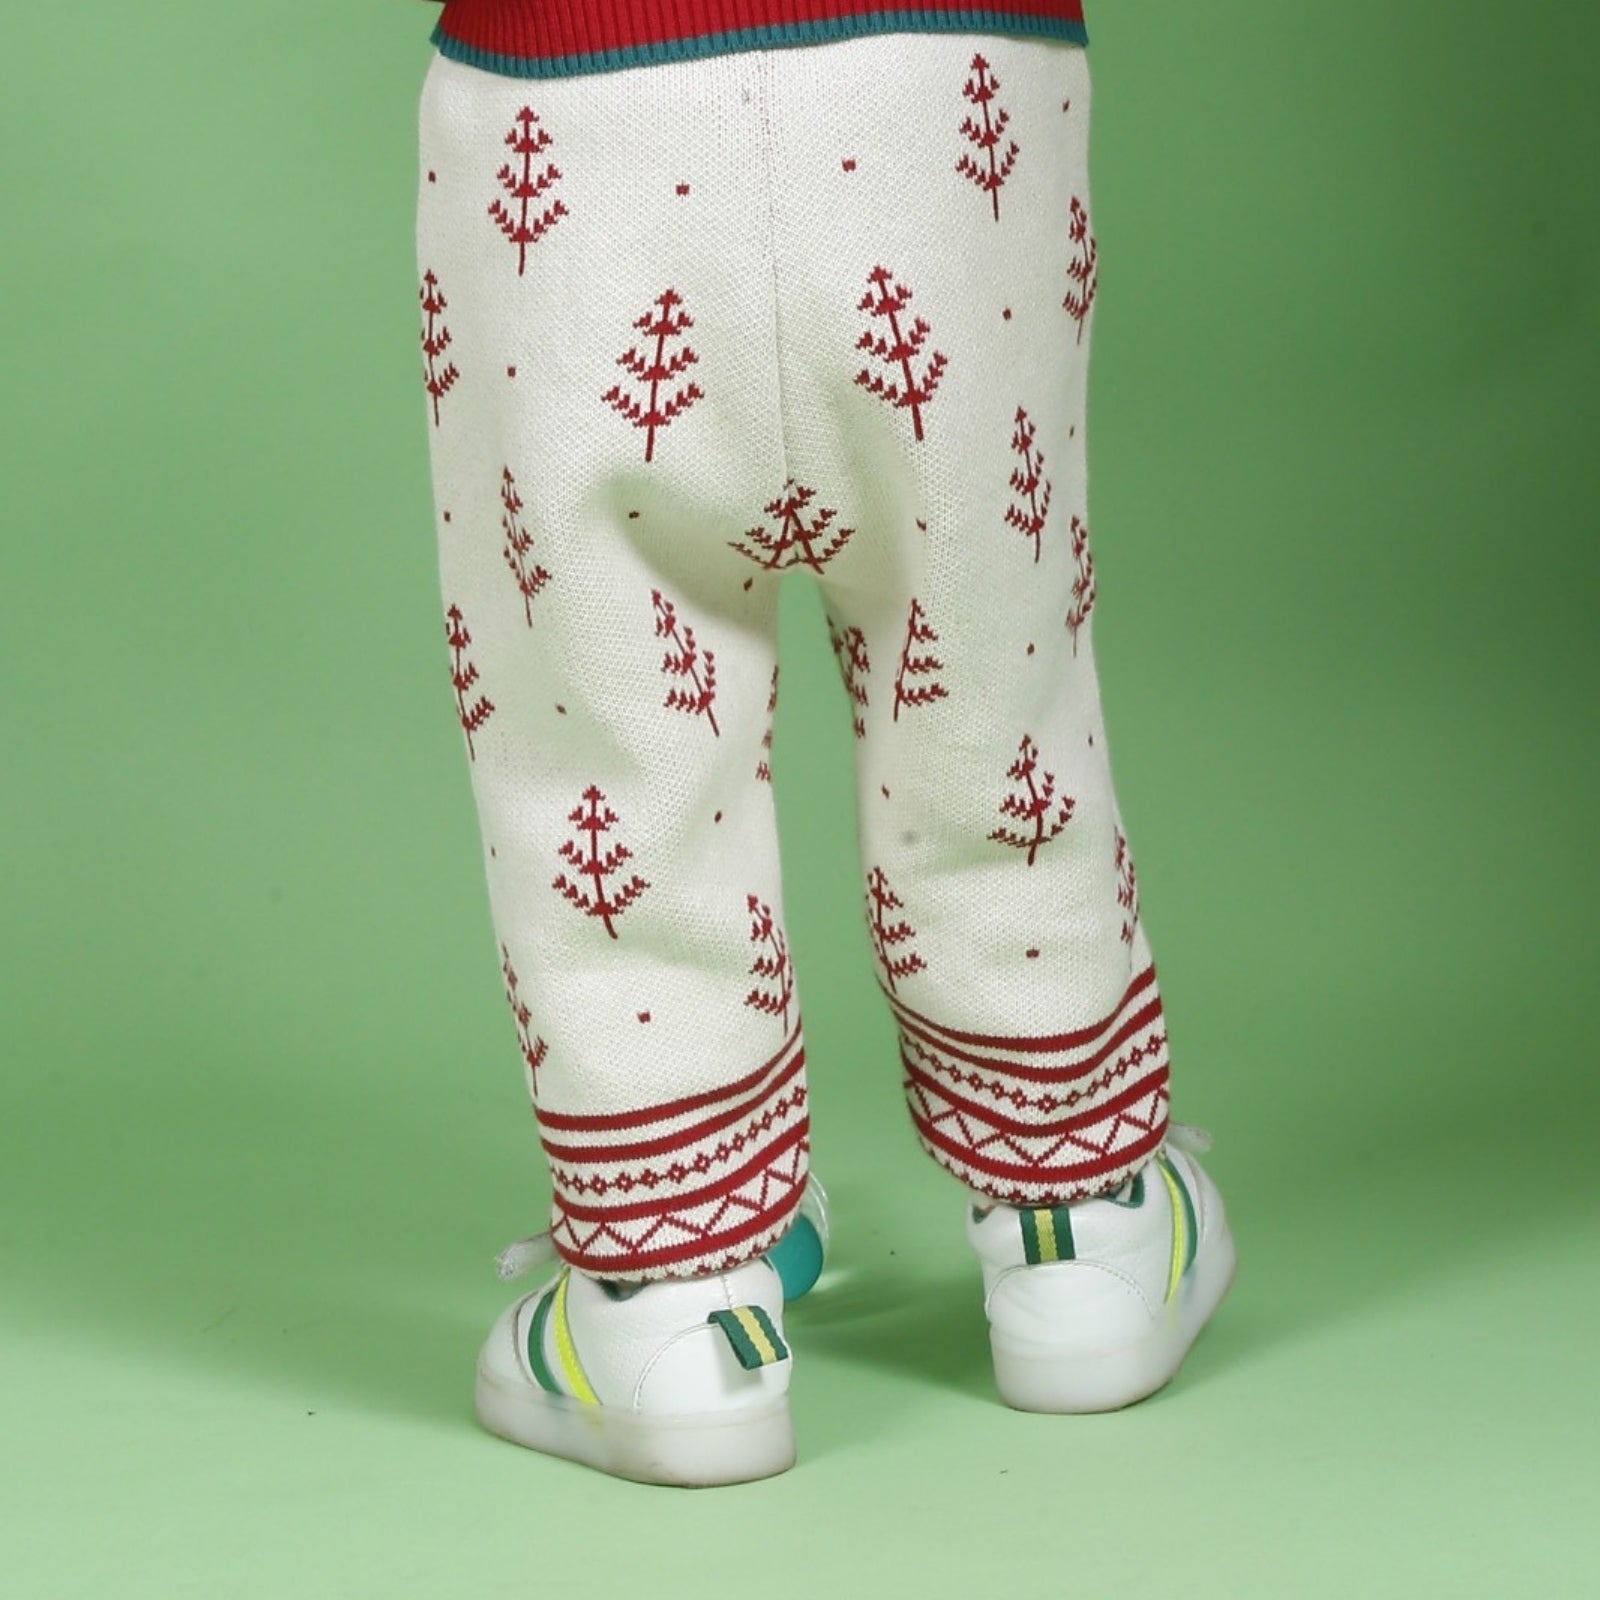 Greendeer Lighhearted 100% Cotton Reindeer Jacquard Sweater with Lower - Crème & Red Set of 2